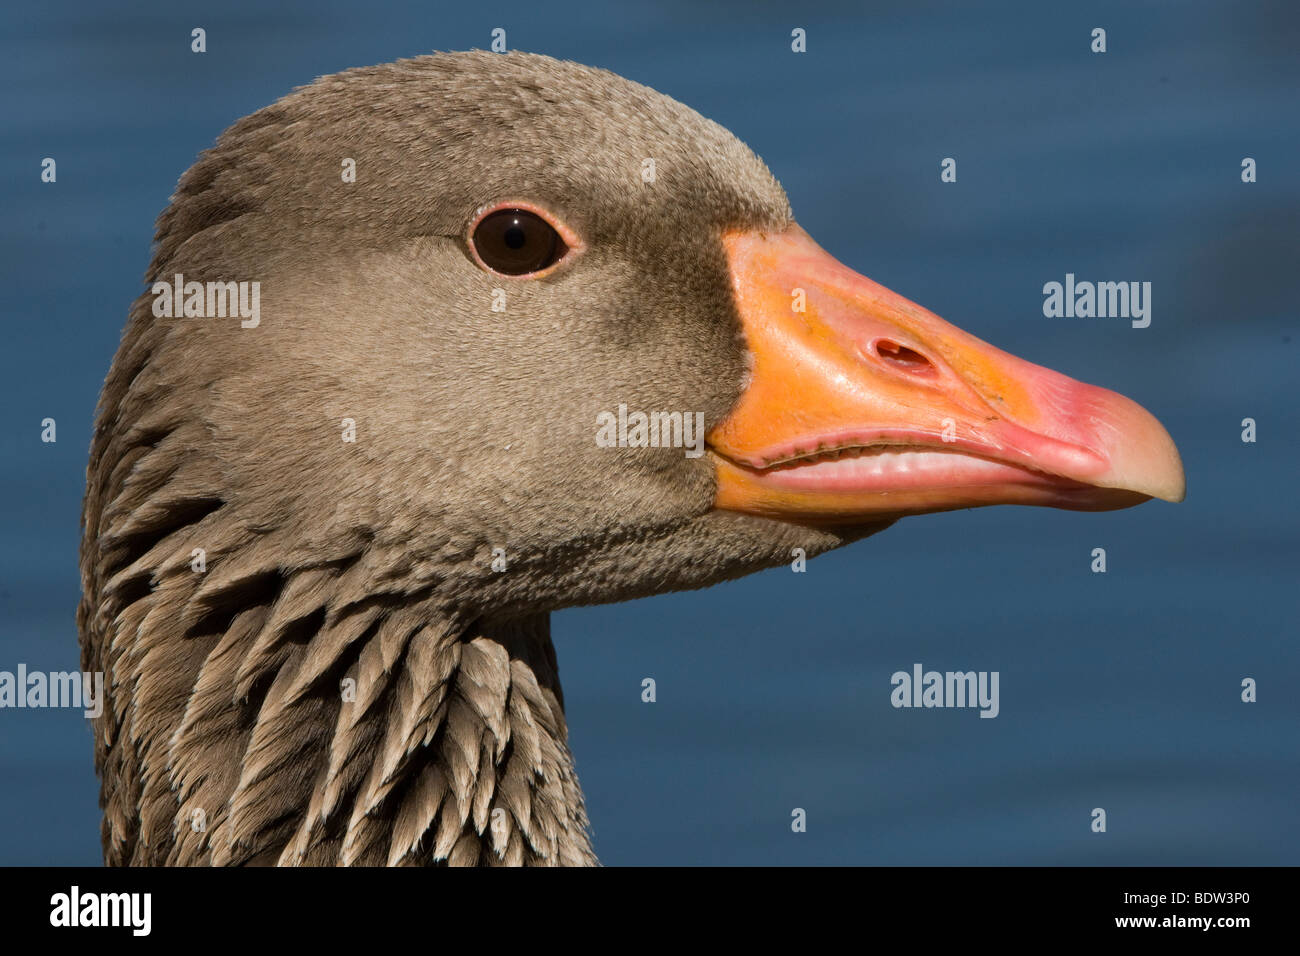 Portrait of a greylag goose Stock Photo